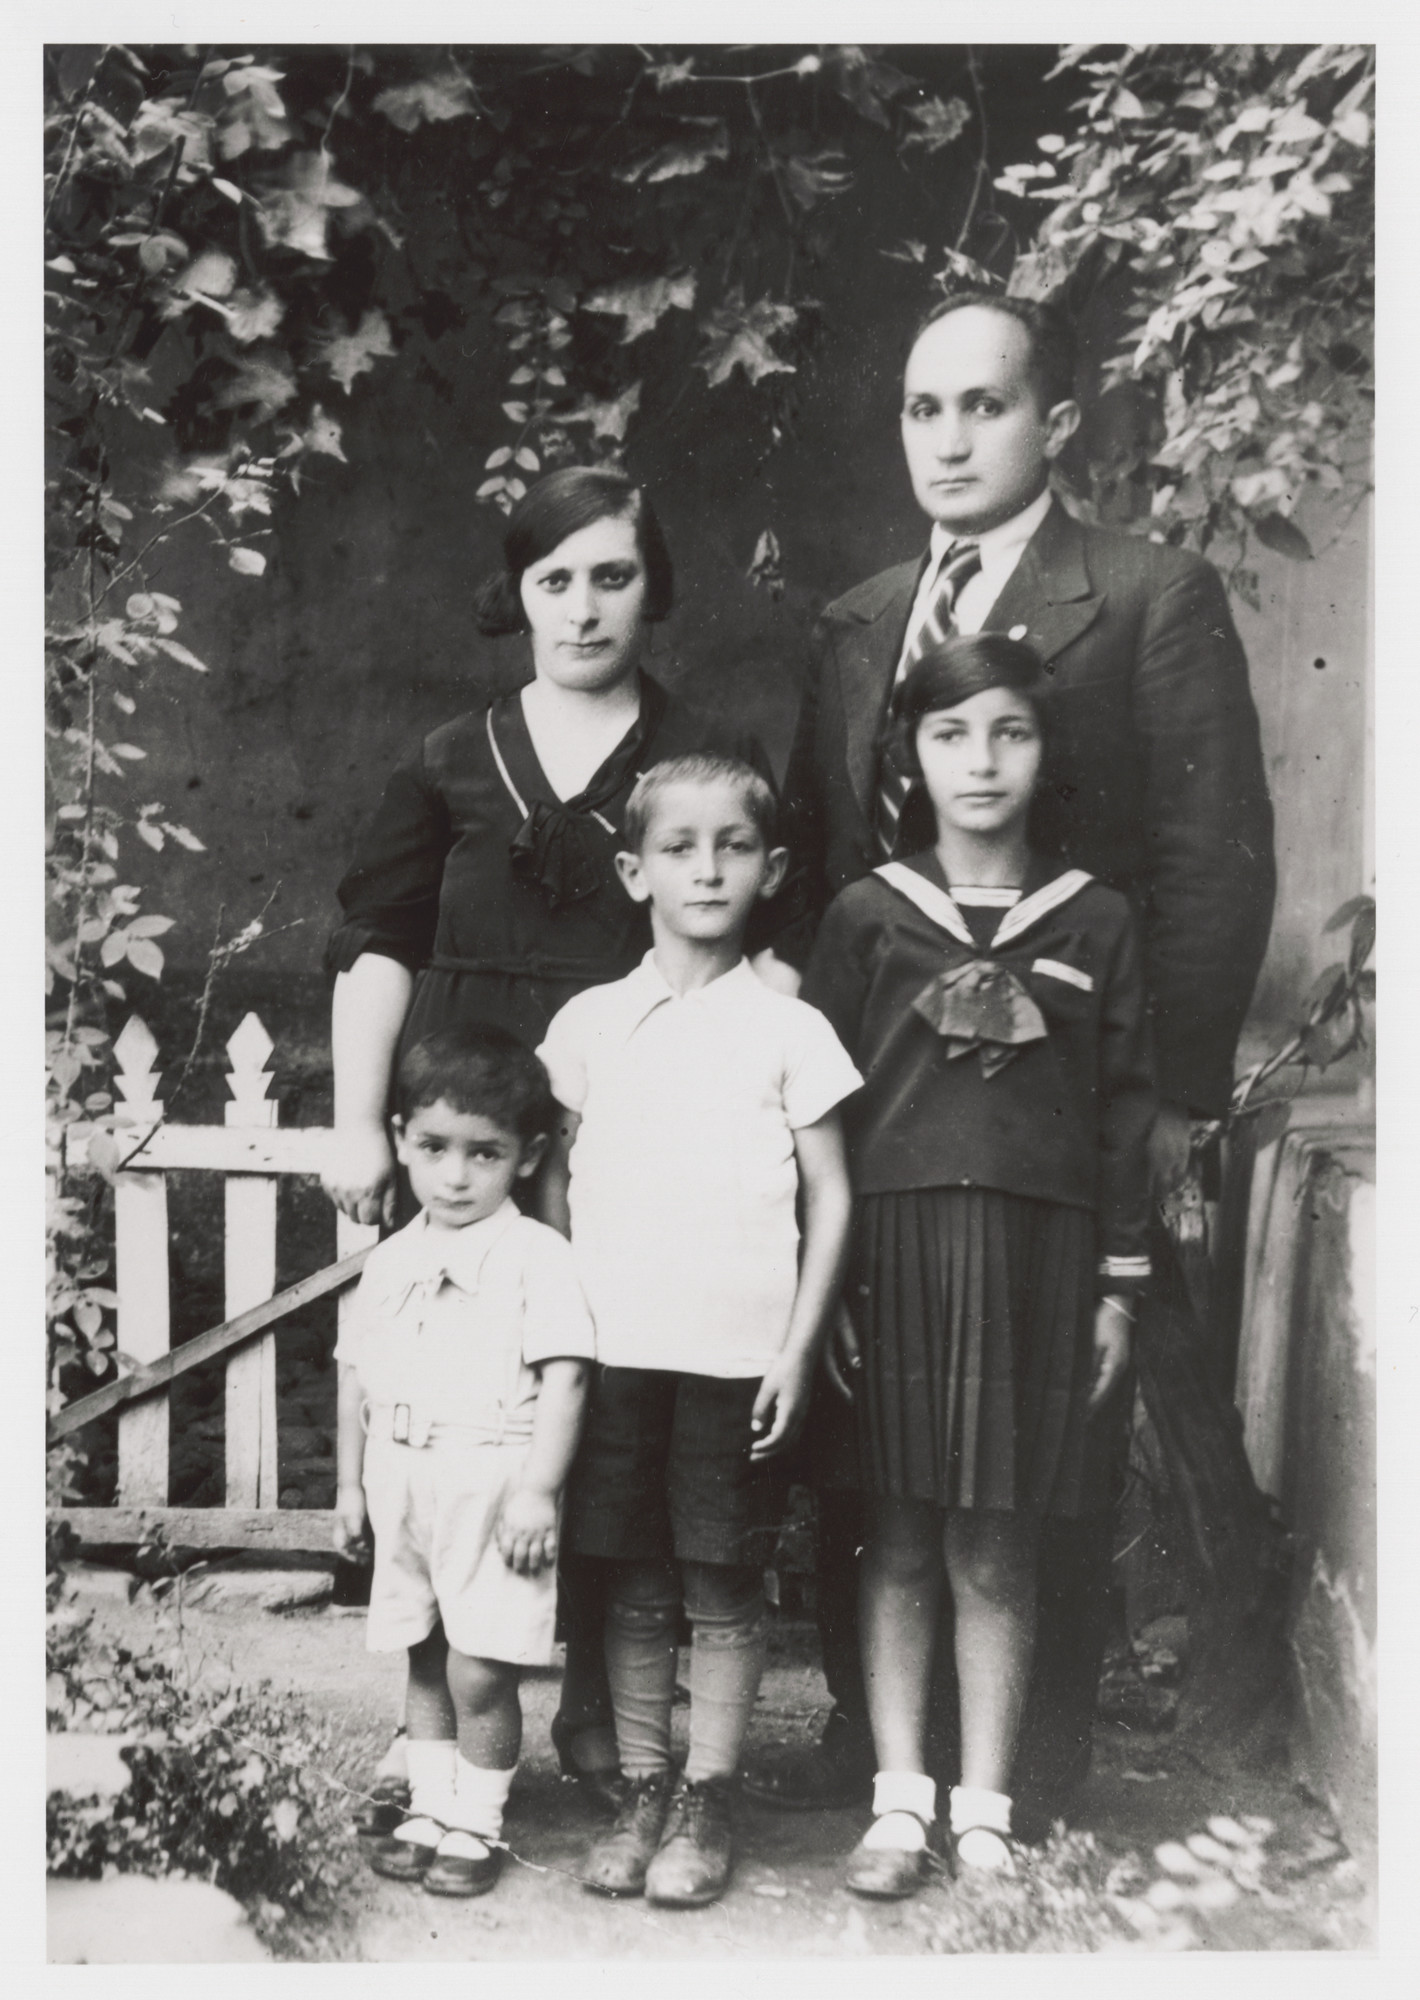 Portrait of the Nahmias family.

Pictured are parents Elvira and Isaac, with children Albert, Victor, and Stella.